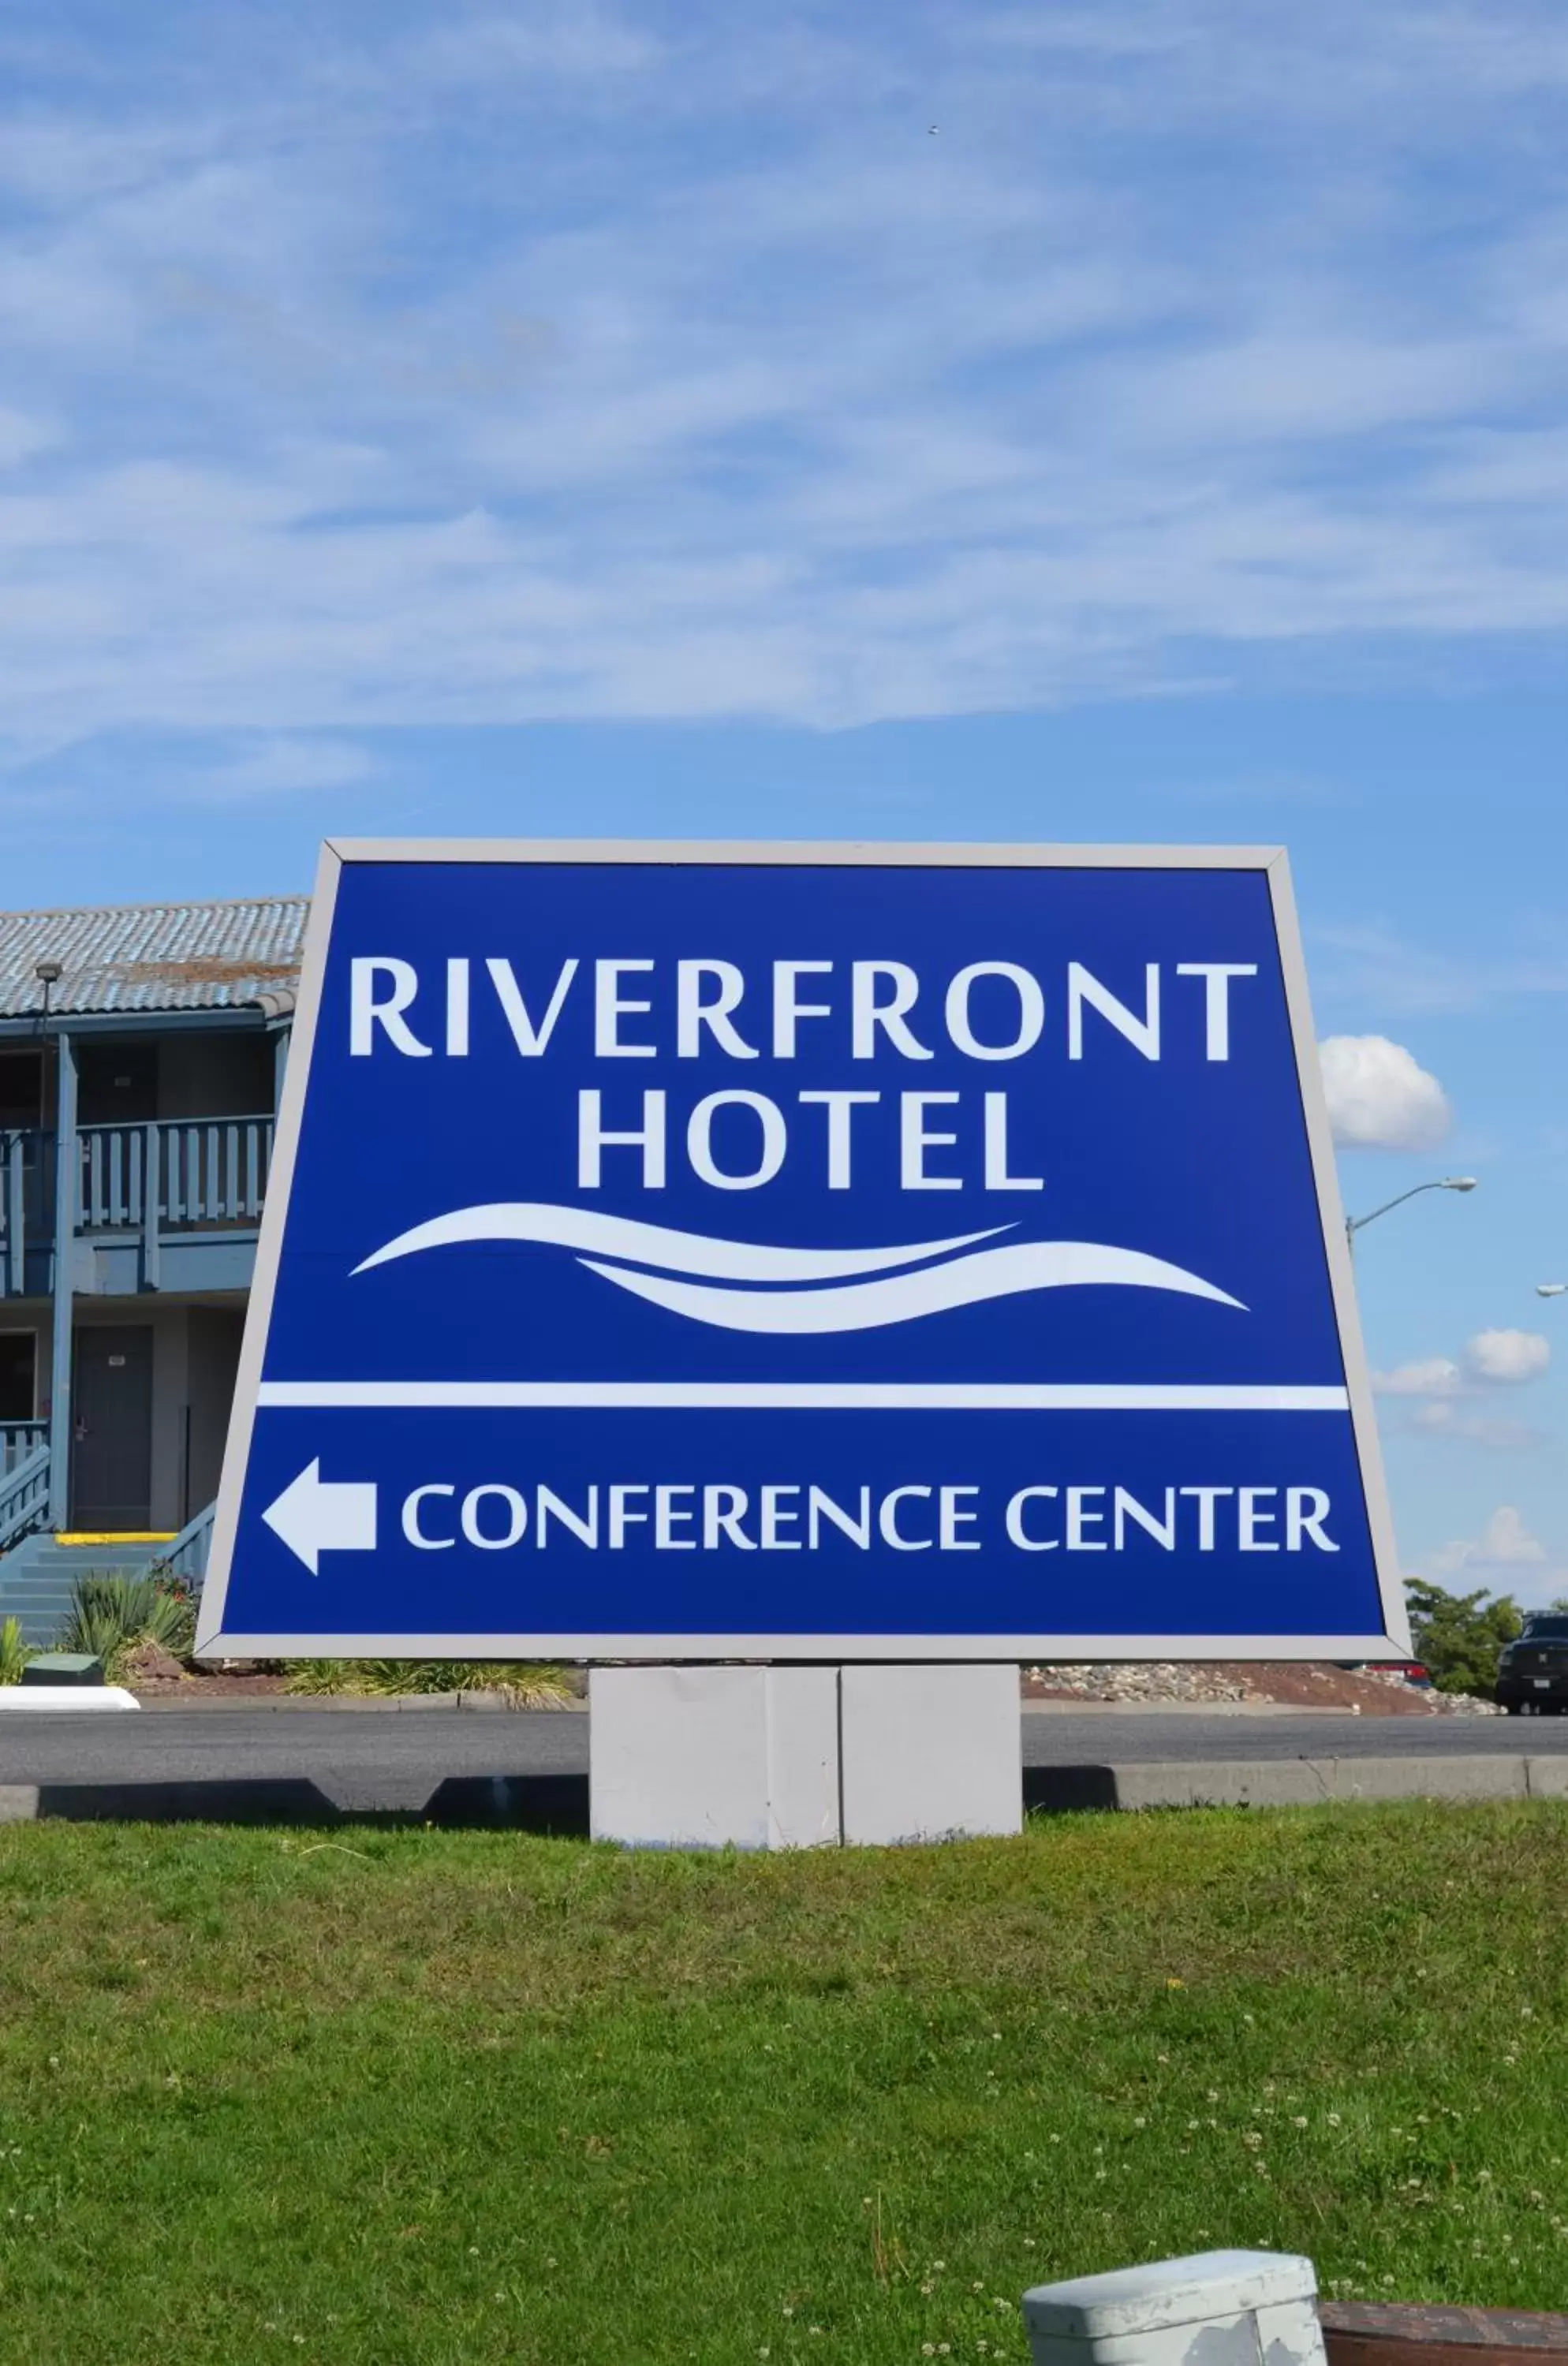 Property logo or sign in Richland Riverfront Hotel, Ascend Hotel Collection